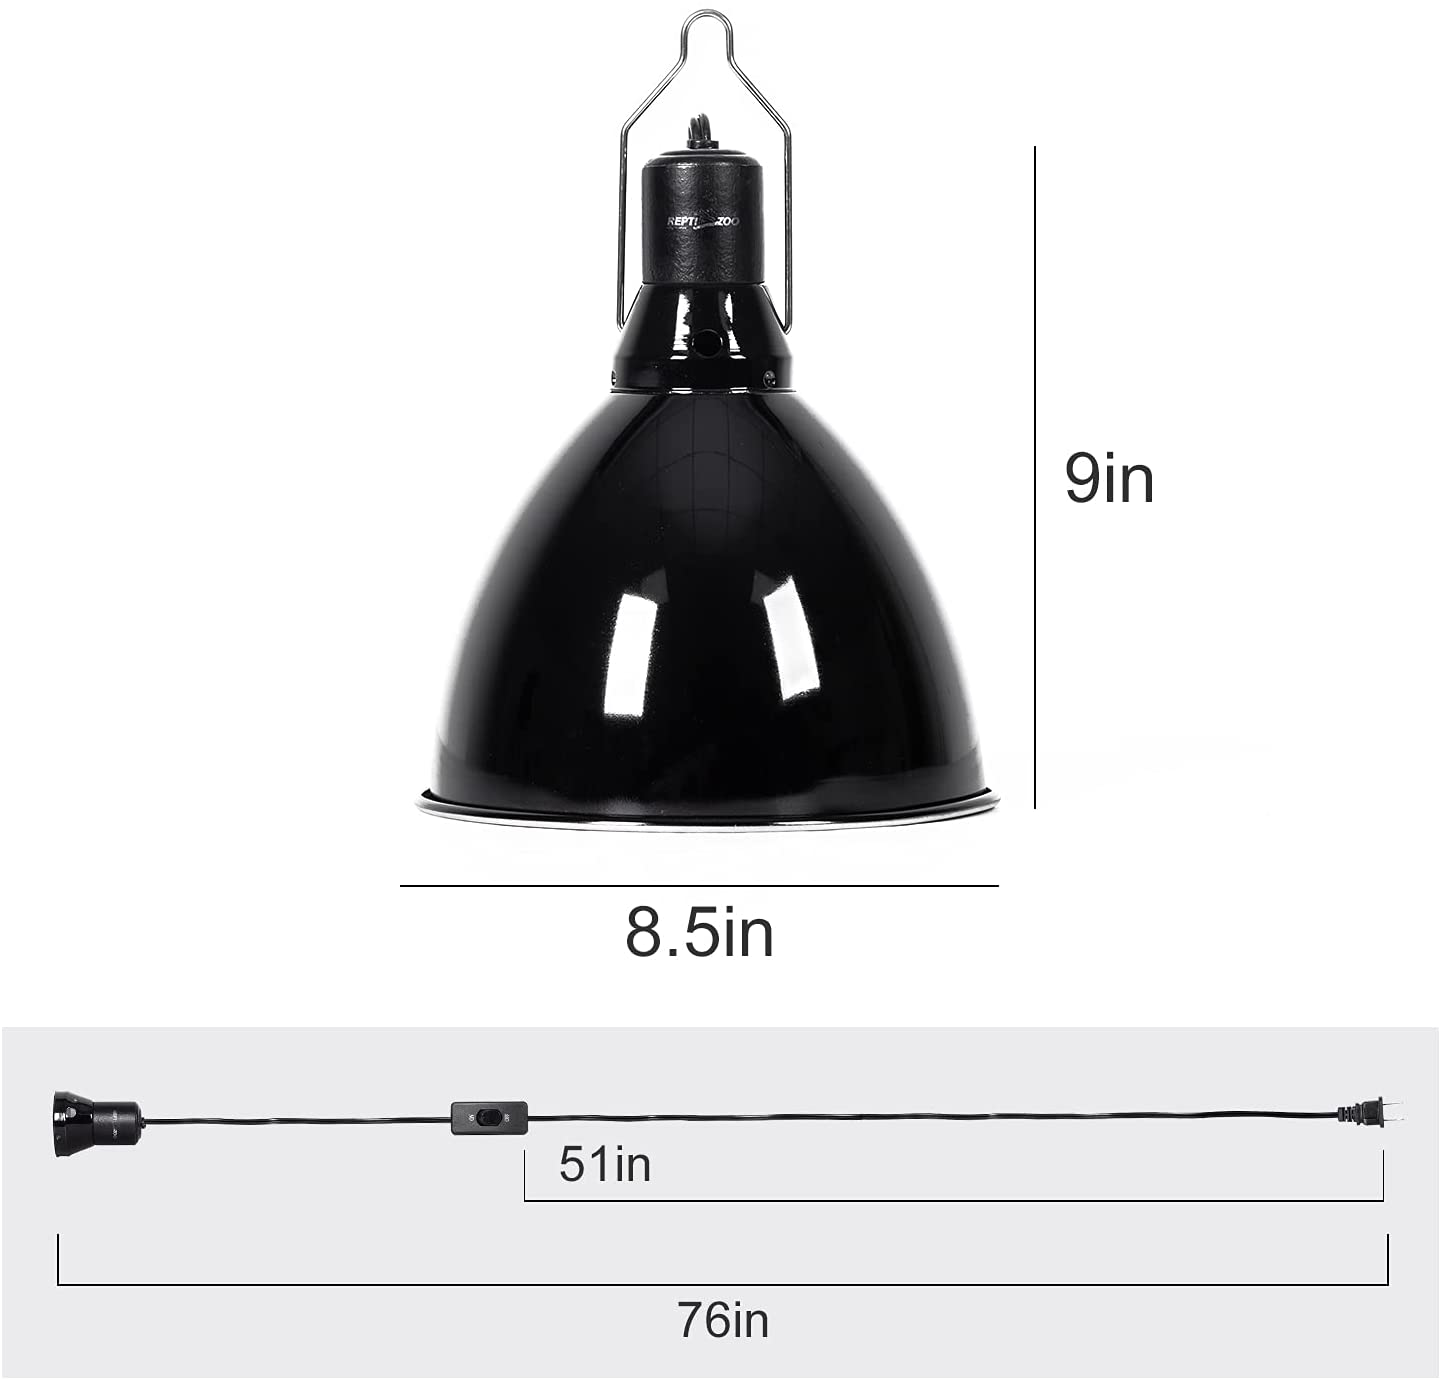 REPTI ZOO 8.5 Inch Reptile Light Fixture 200W 2 in 1 E26 Base with Removable Ceramic Socket with on off Toggle Switch in Black,Aquarium Dome Reptile UVB Light Socket Fixture (Without Bulbs) Animals & Pet Supplies > Pet Supplies > Reptile & Amphibian Supplies > Reptile & Amphibian Habitat Accessories REPTI ZOO   